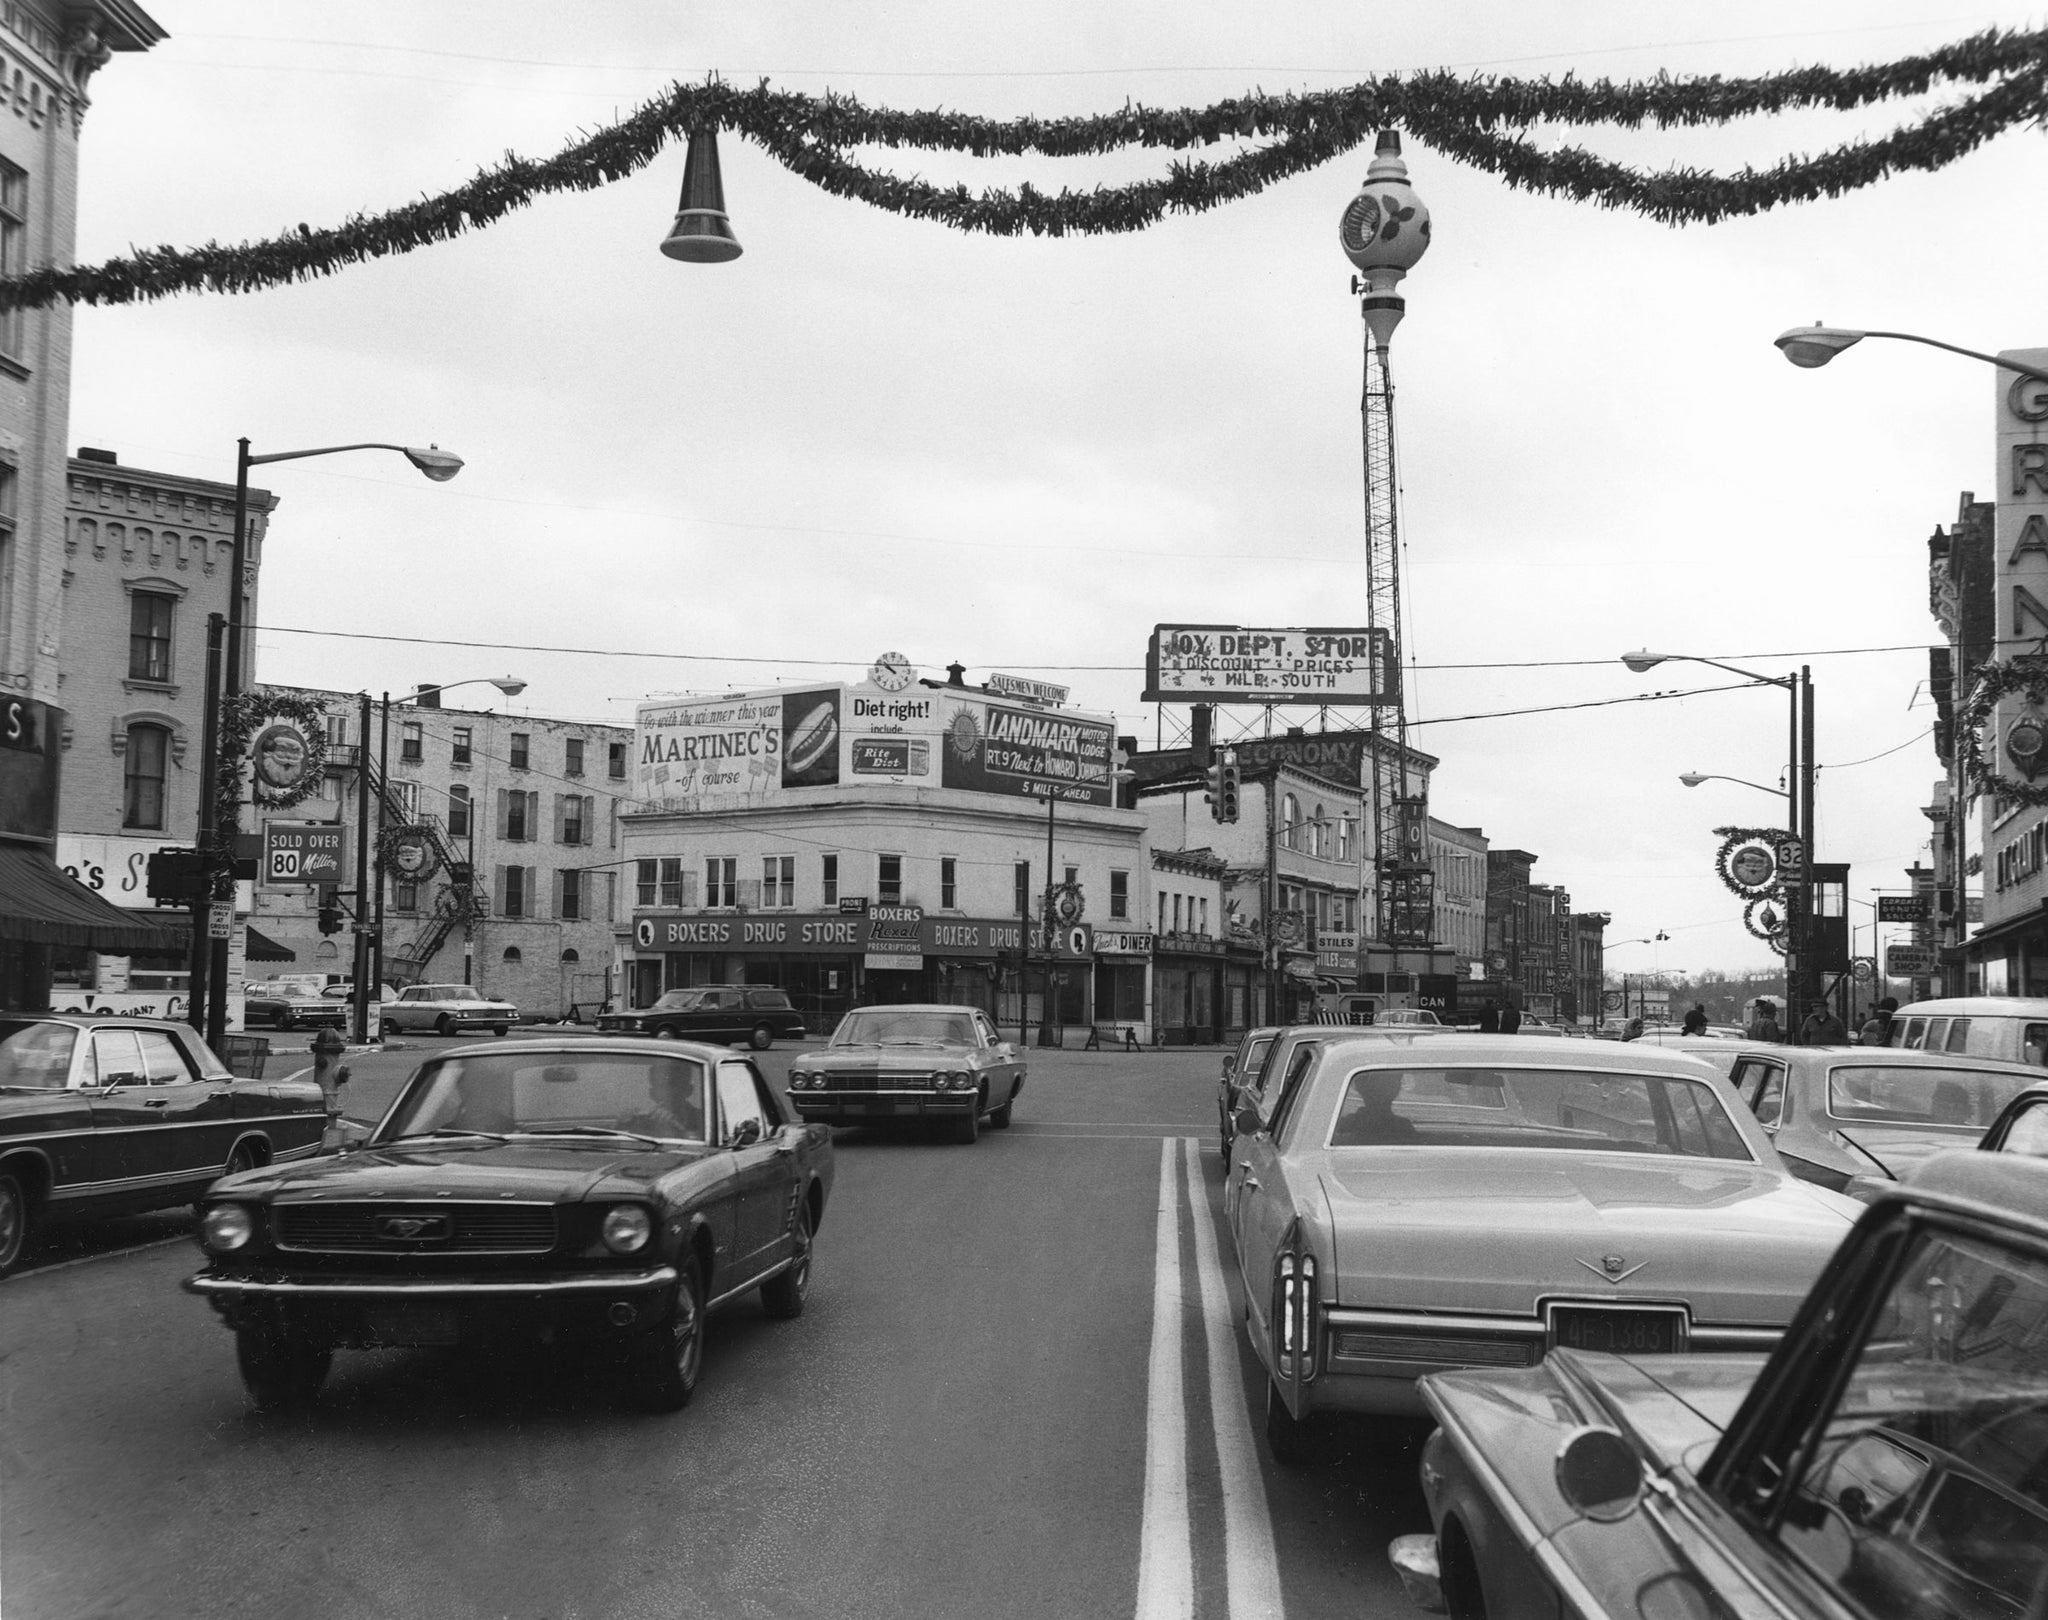 View down Glen Street toward Boxer’s Drug Store on the intersection of Glen and Warren Streets, November 1968. Note the Christmas decorations hanging above the street. -- Folklife Center at Crandall Public Library